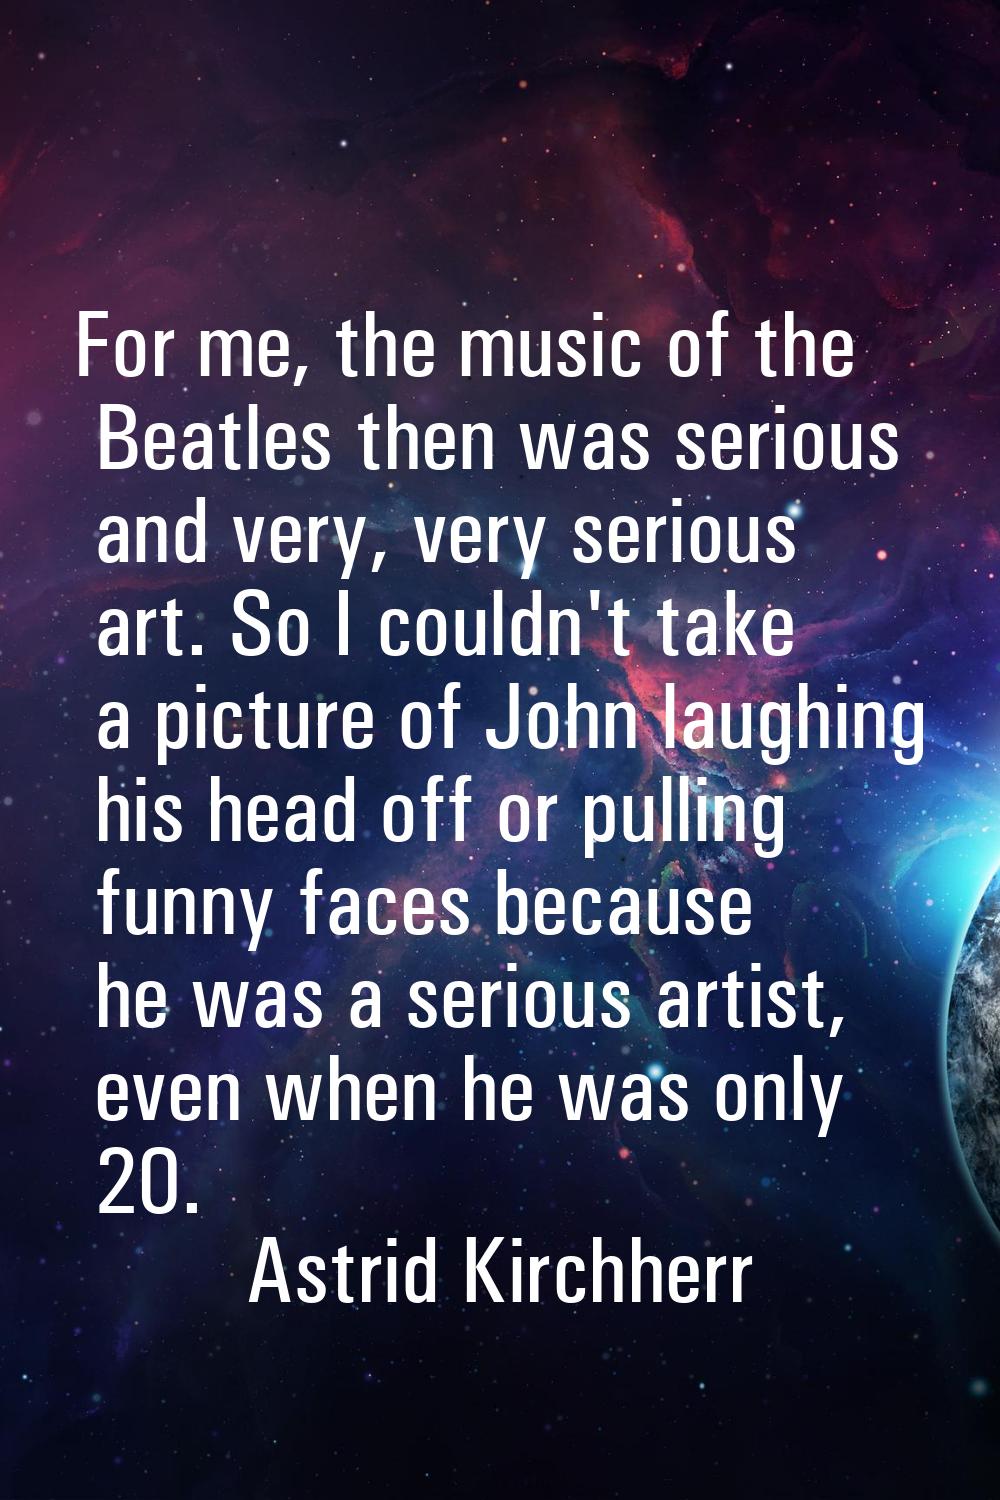 For me, the music of the Beatles then was serious and very, very serious art. So I couldn't take a 